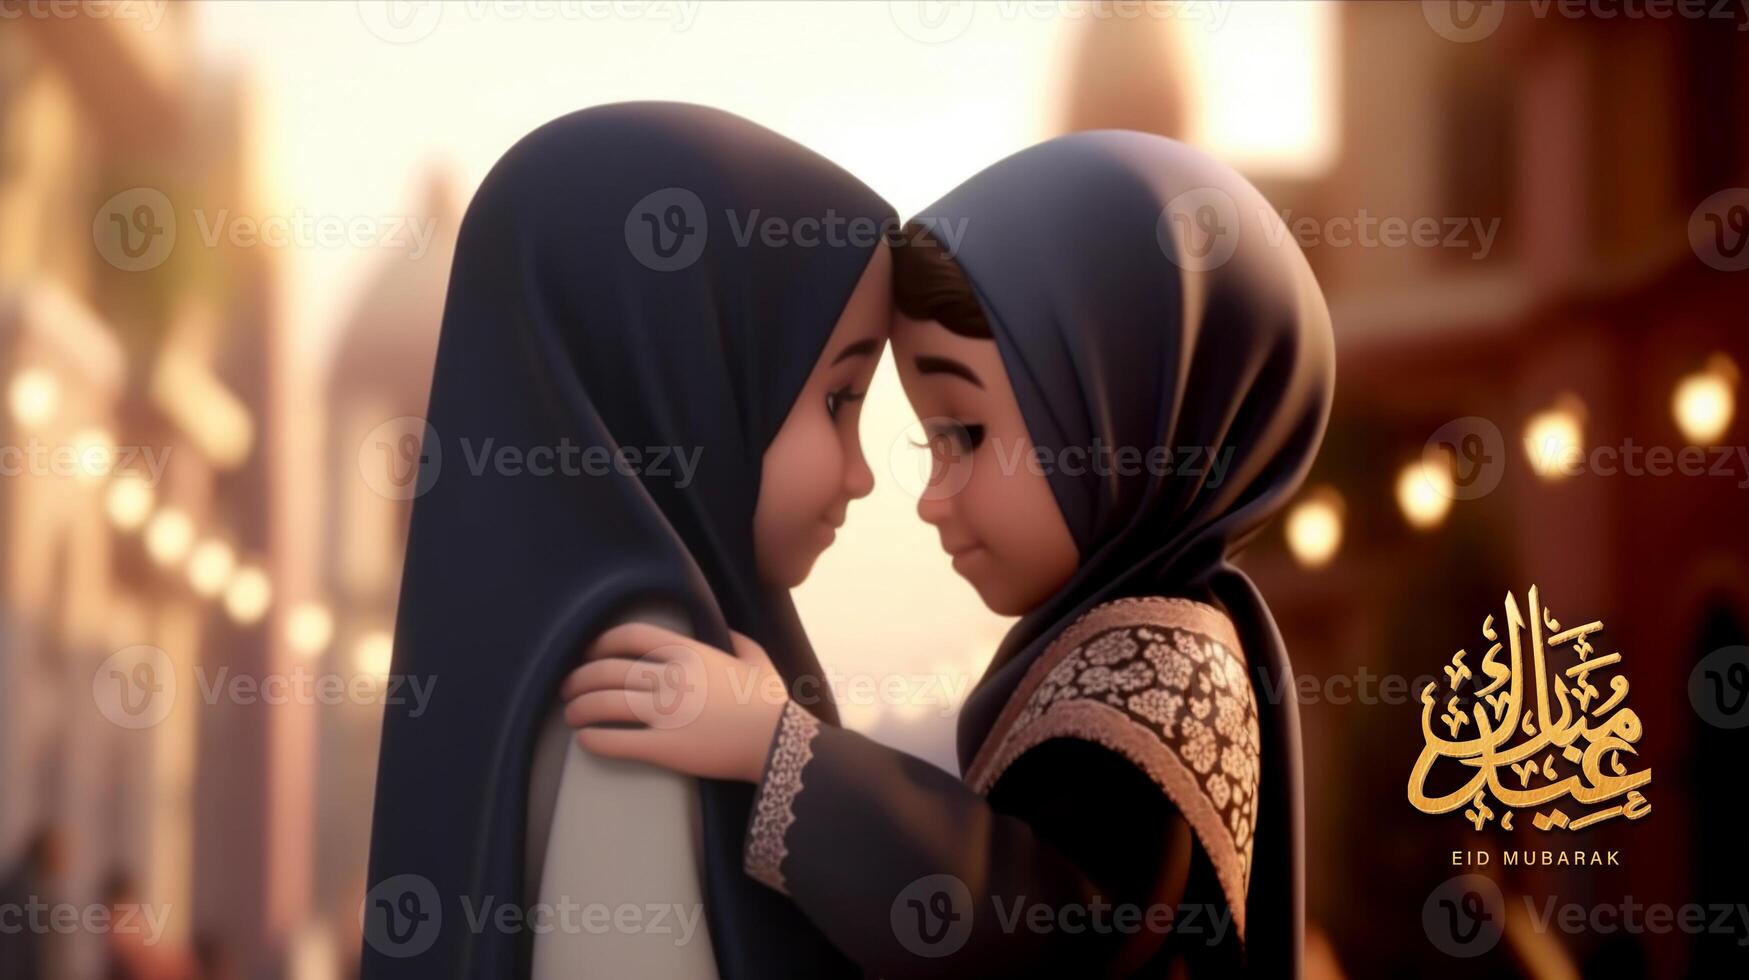 Adorable Disney Style Avatar of Arabian Girls Hugging and Wishing Each Other for Eid Mubarak Concept, . photo